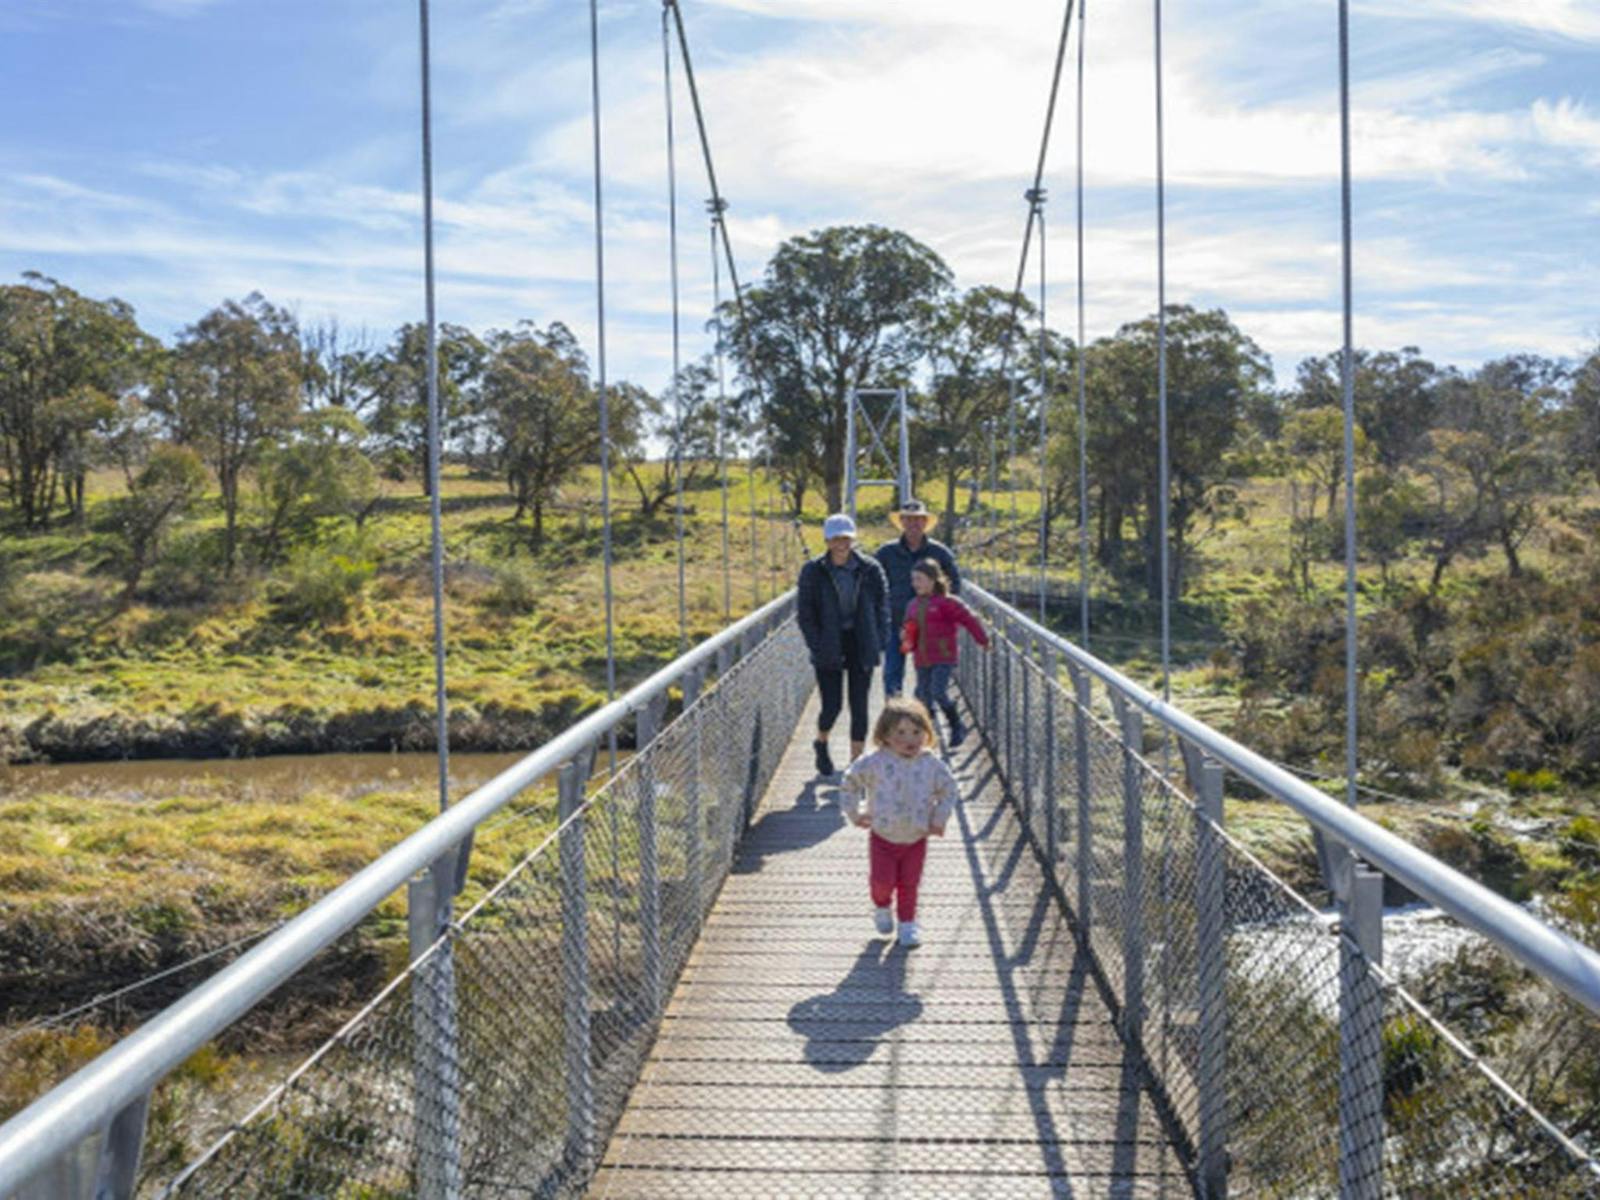 Adults and children walking on suspension bridge Oxley Wild Rivers National Park. Photo: John Smith